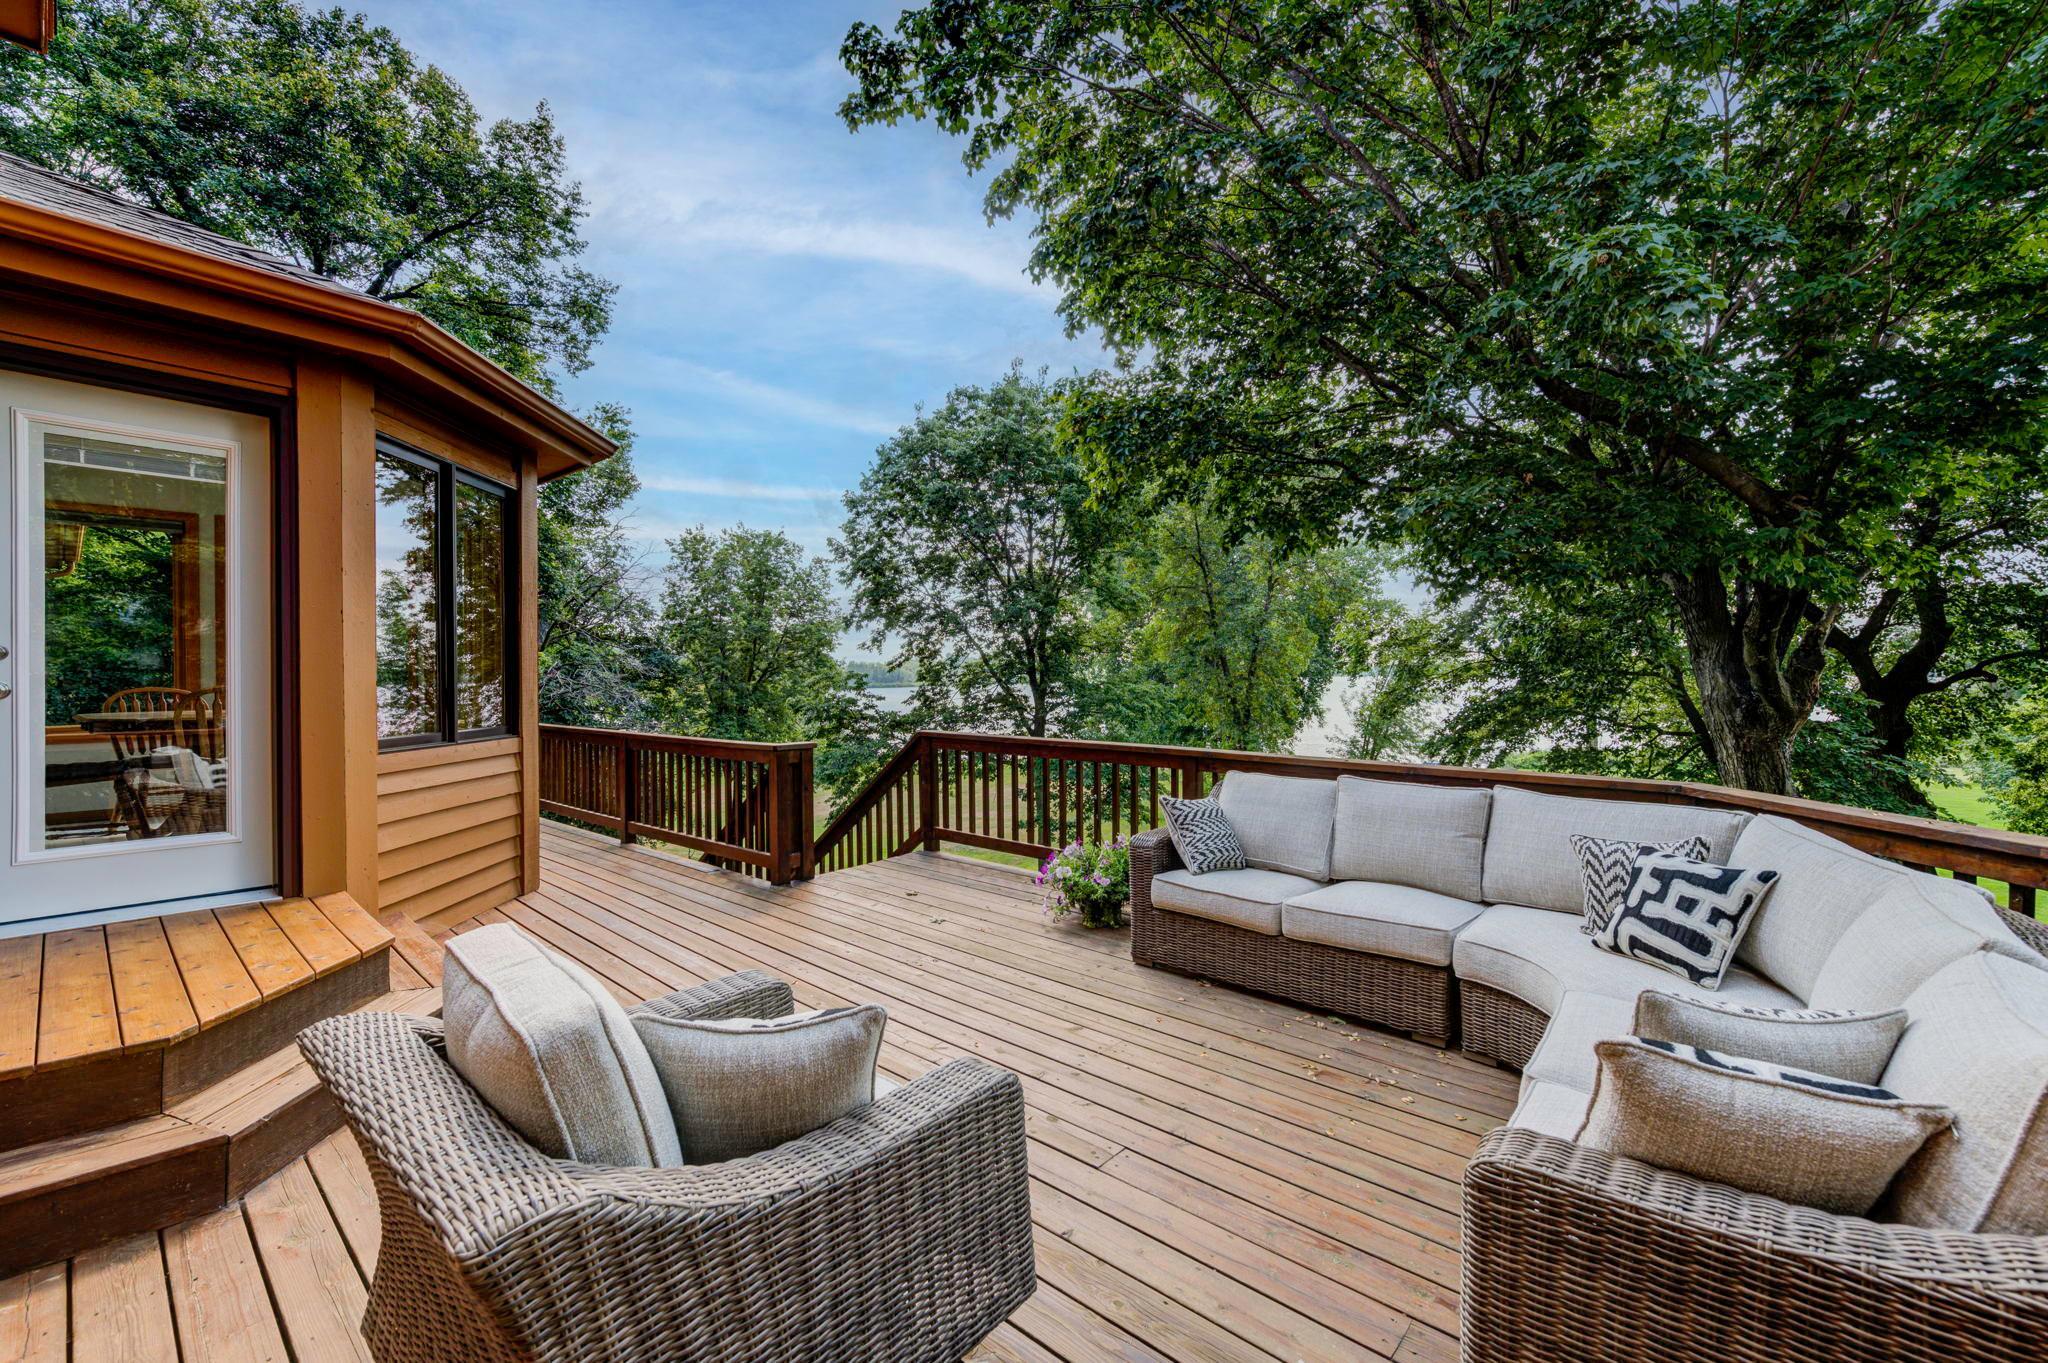 The expansive deck is perfect for entertaining or just relaxing as you overlook the lake! The exterior of the home has been freshly painted and is ready for you to start enjoying all that life at the lake has to offer!